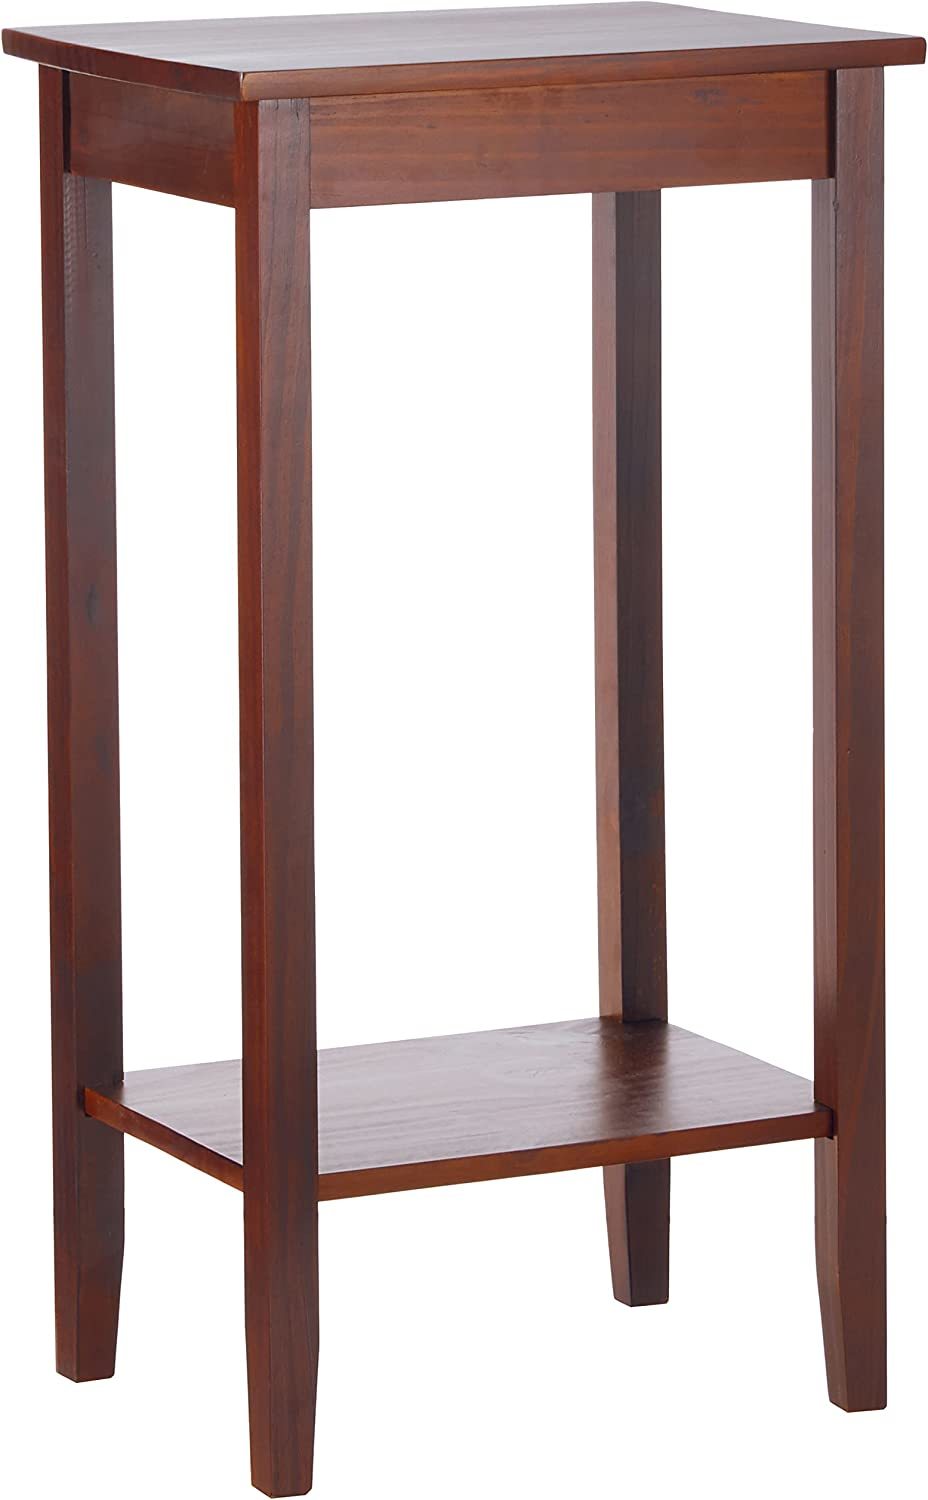 Dhp Tall Rosewood End Table. - $93.92